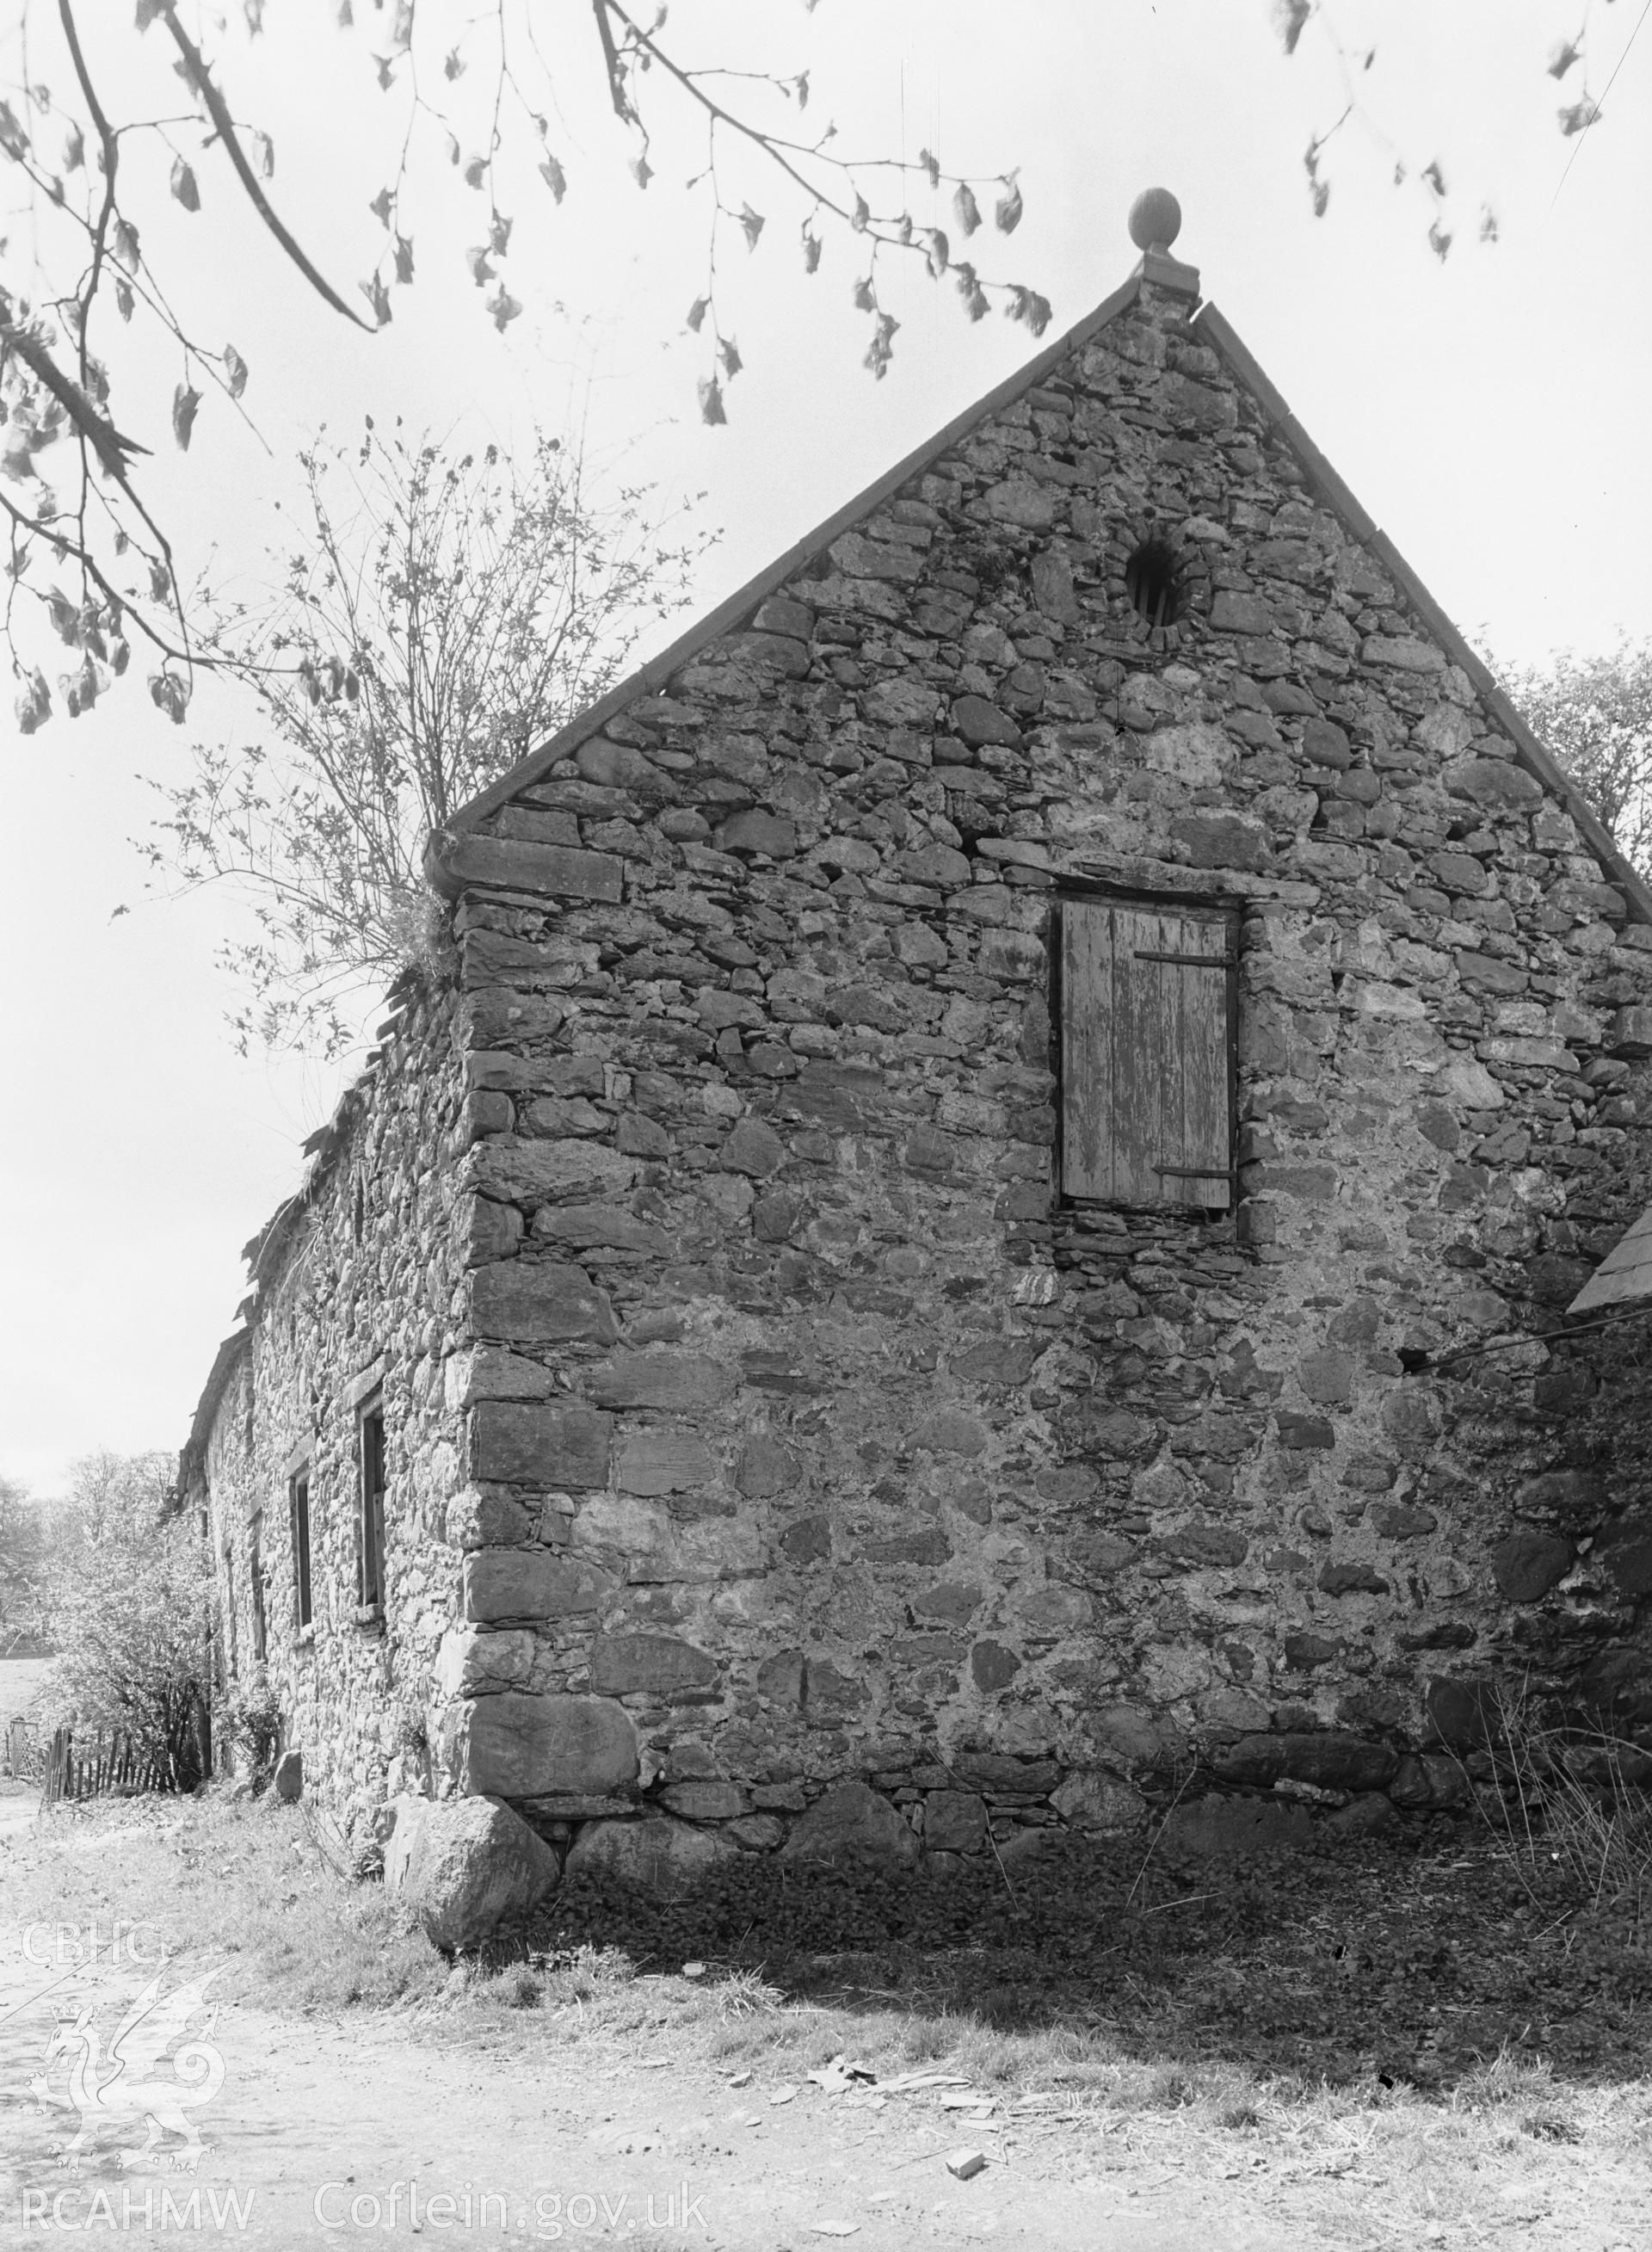 Exterior view of the old farm building